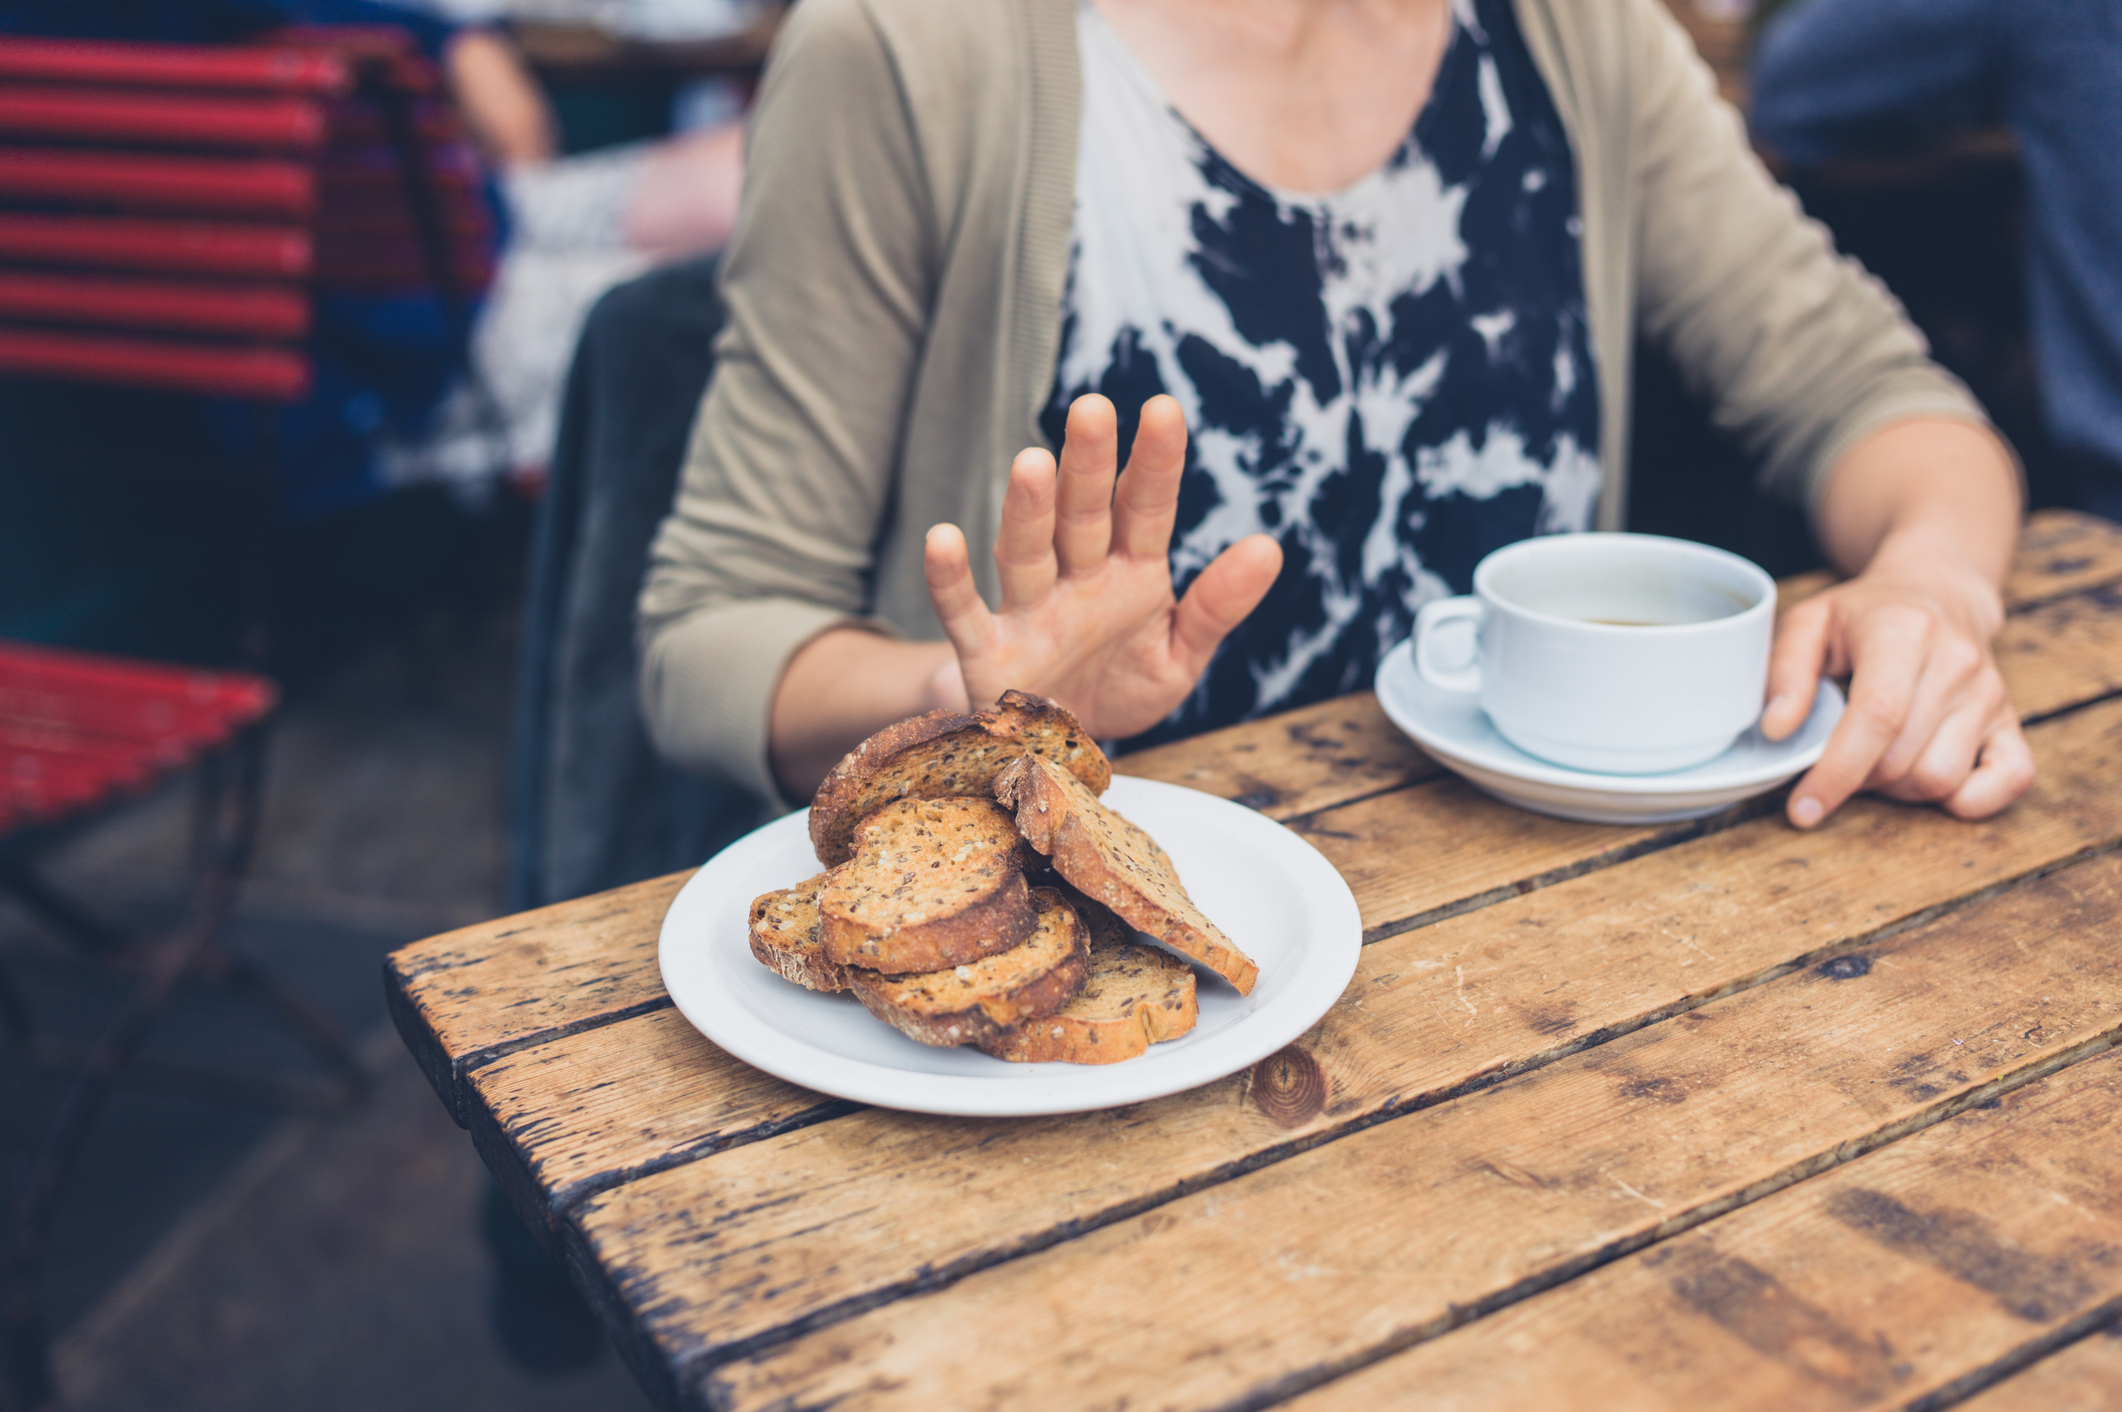 Woman on gluten free diet is saying no thanks to toast in a café.